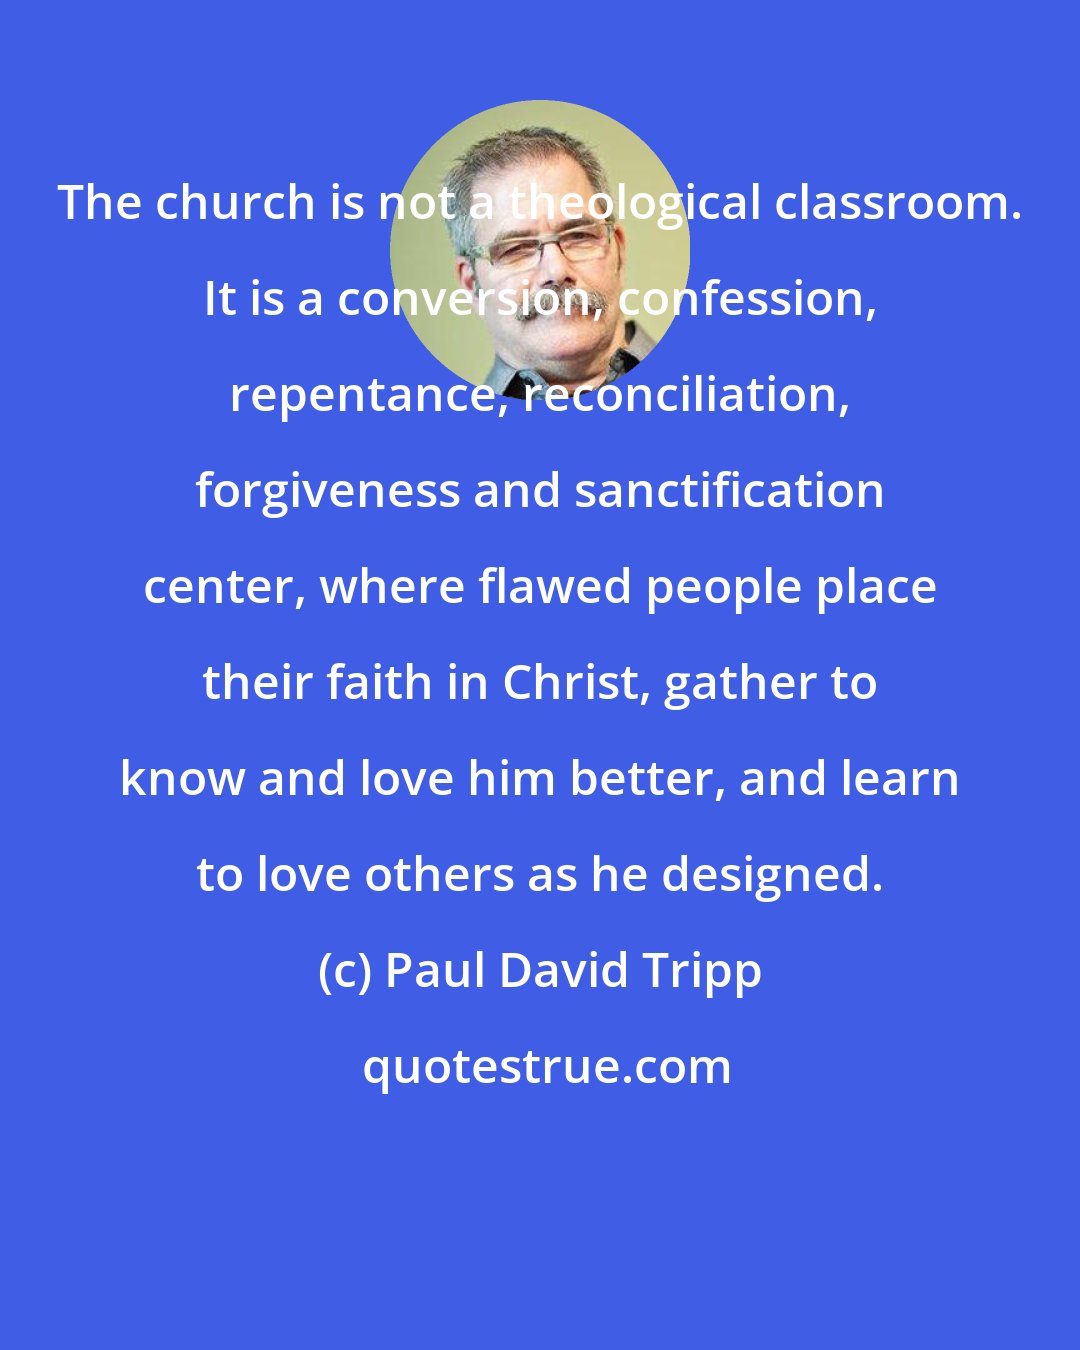 Paul David Tripp: The church is not a theological classroom. It is a conversion, confession, repentance, reconciliation, forgiveness and sanctification center, where flawed people place their faith in Christ, gather to know and love him better, and learn to love others as he designed.